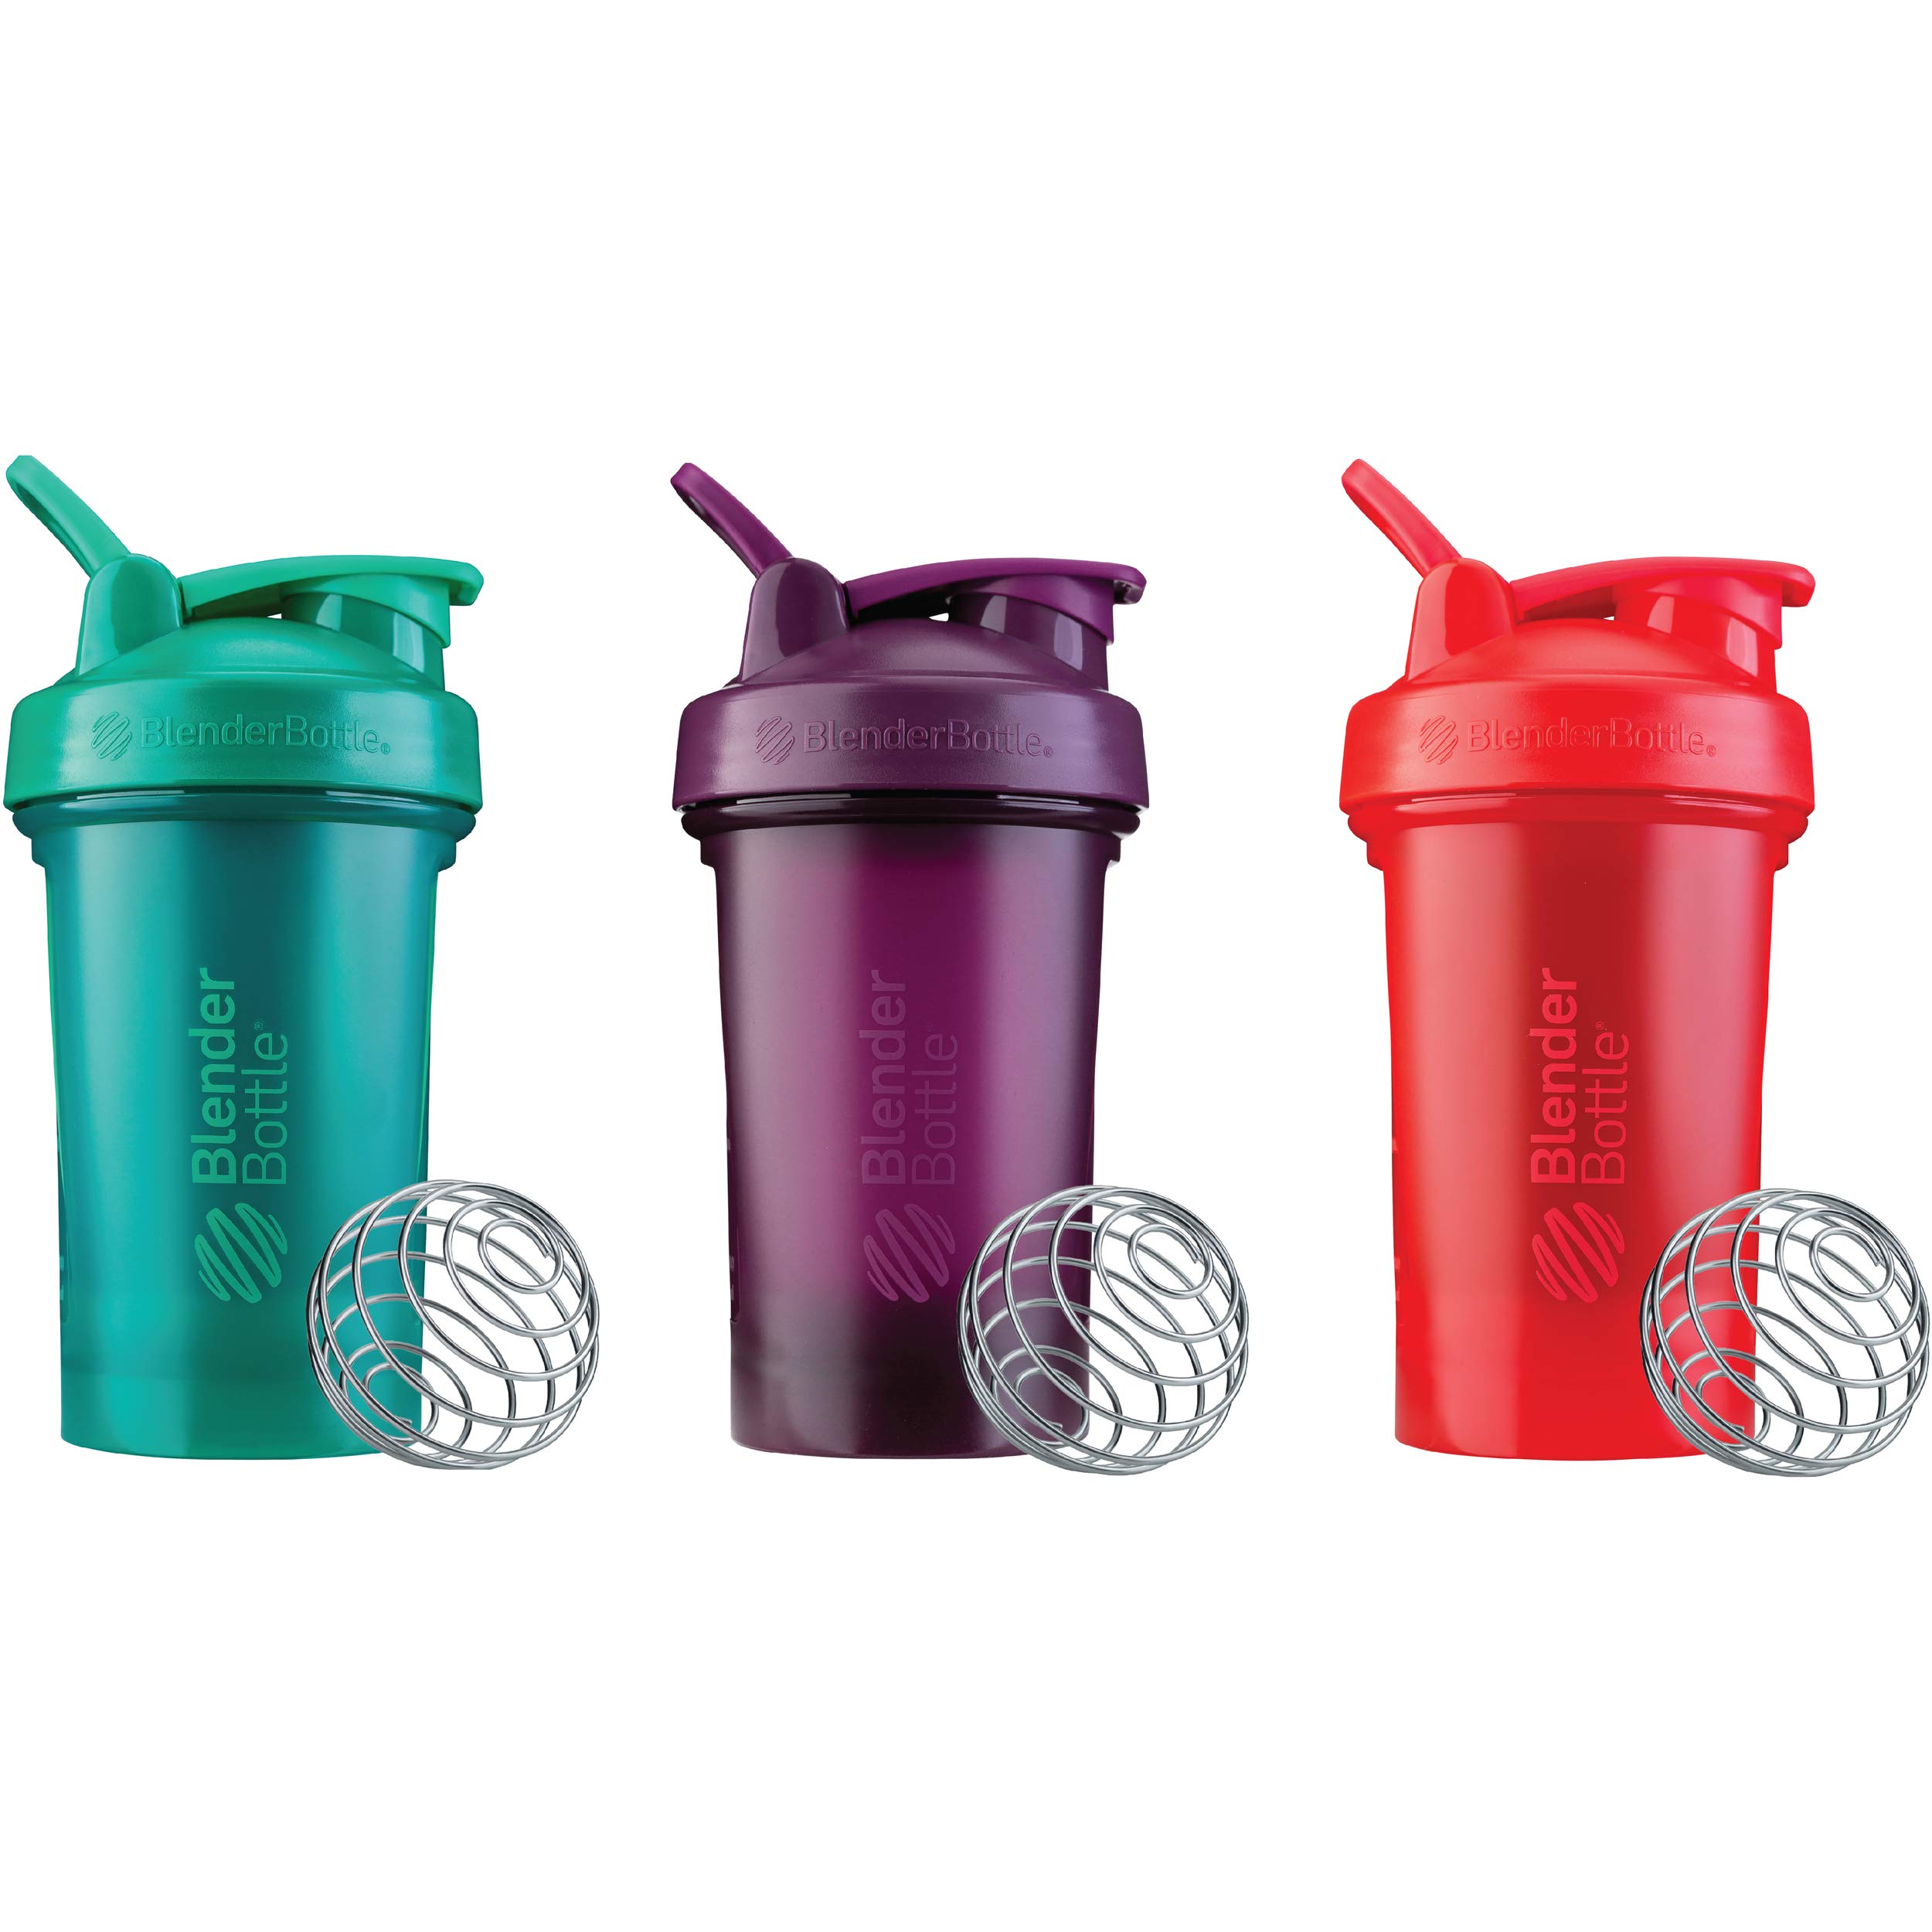 BlenderBottle Classic V2 Shaker Bottle Perfect for Protein Shakes and Pre Workout, 20-Ounce (3-Pack) Red, Green, and Plum